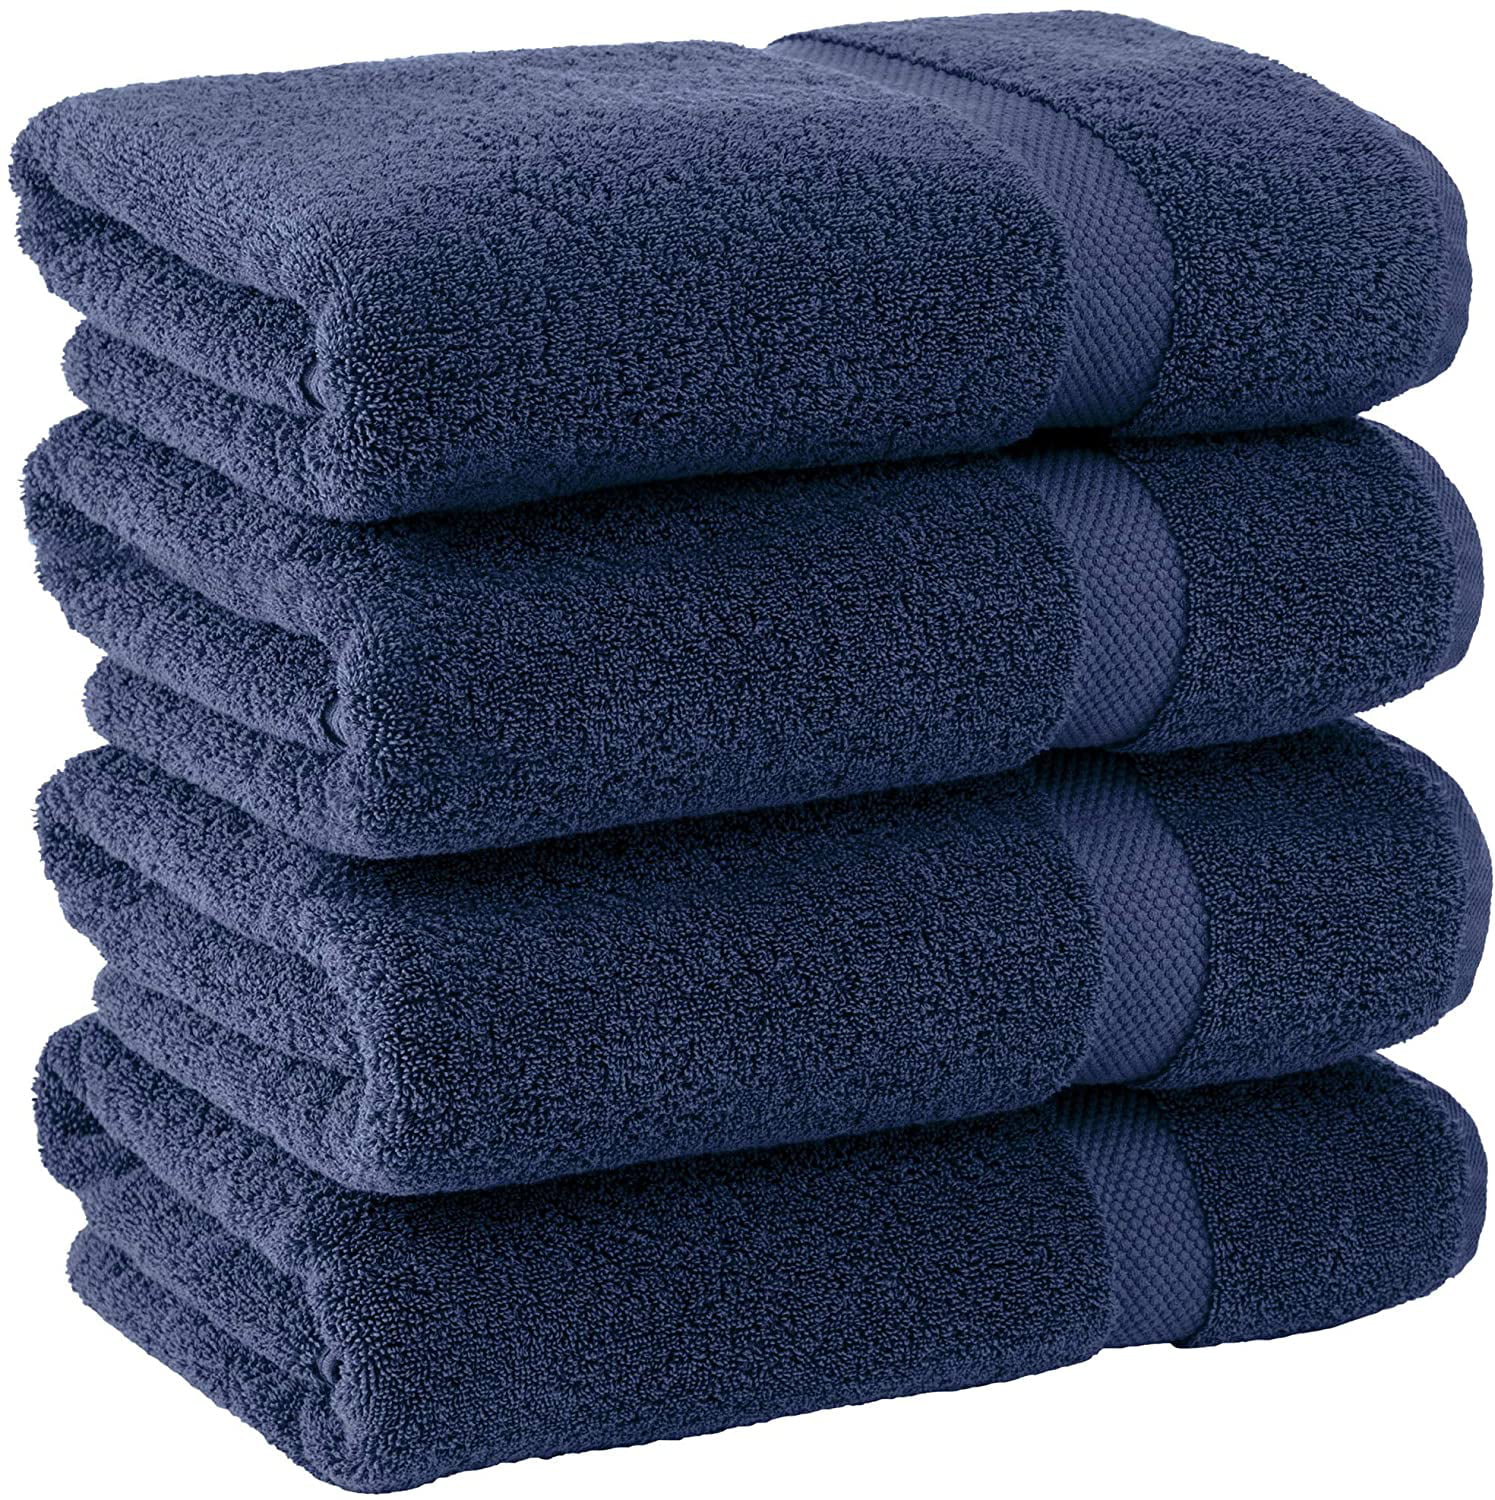 Soft Extra Large Cotton Bath Towels 27x54 Hotel Sport Swimming Spa Gym Towel Lot 